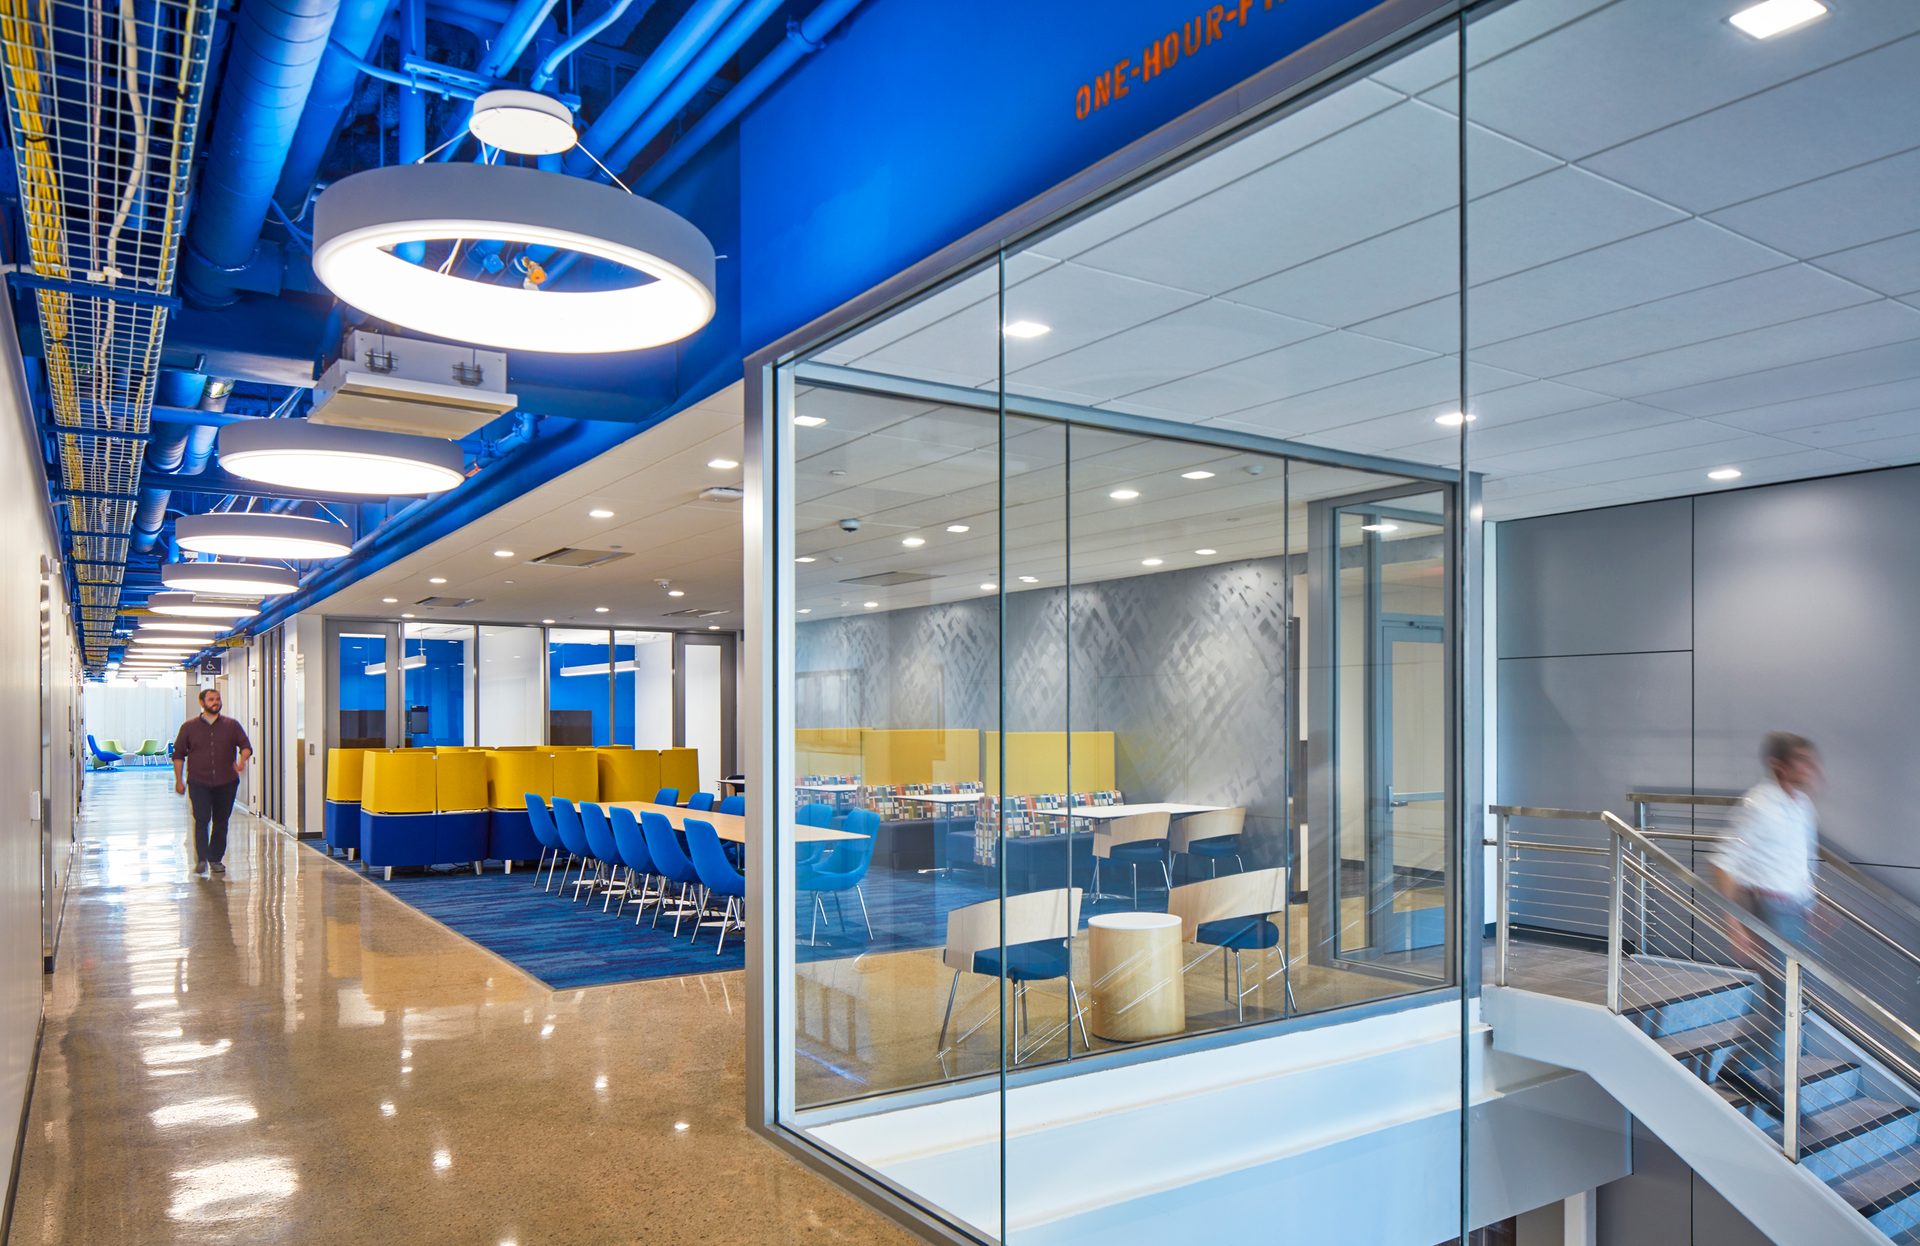 Nearly unobstructed floor to ceiling fire-rated glass panels ensure visual connectivity between levels